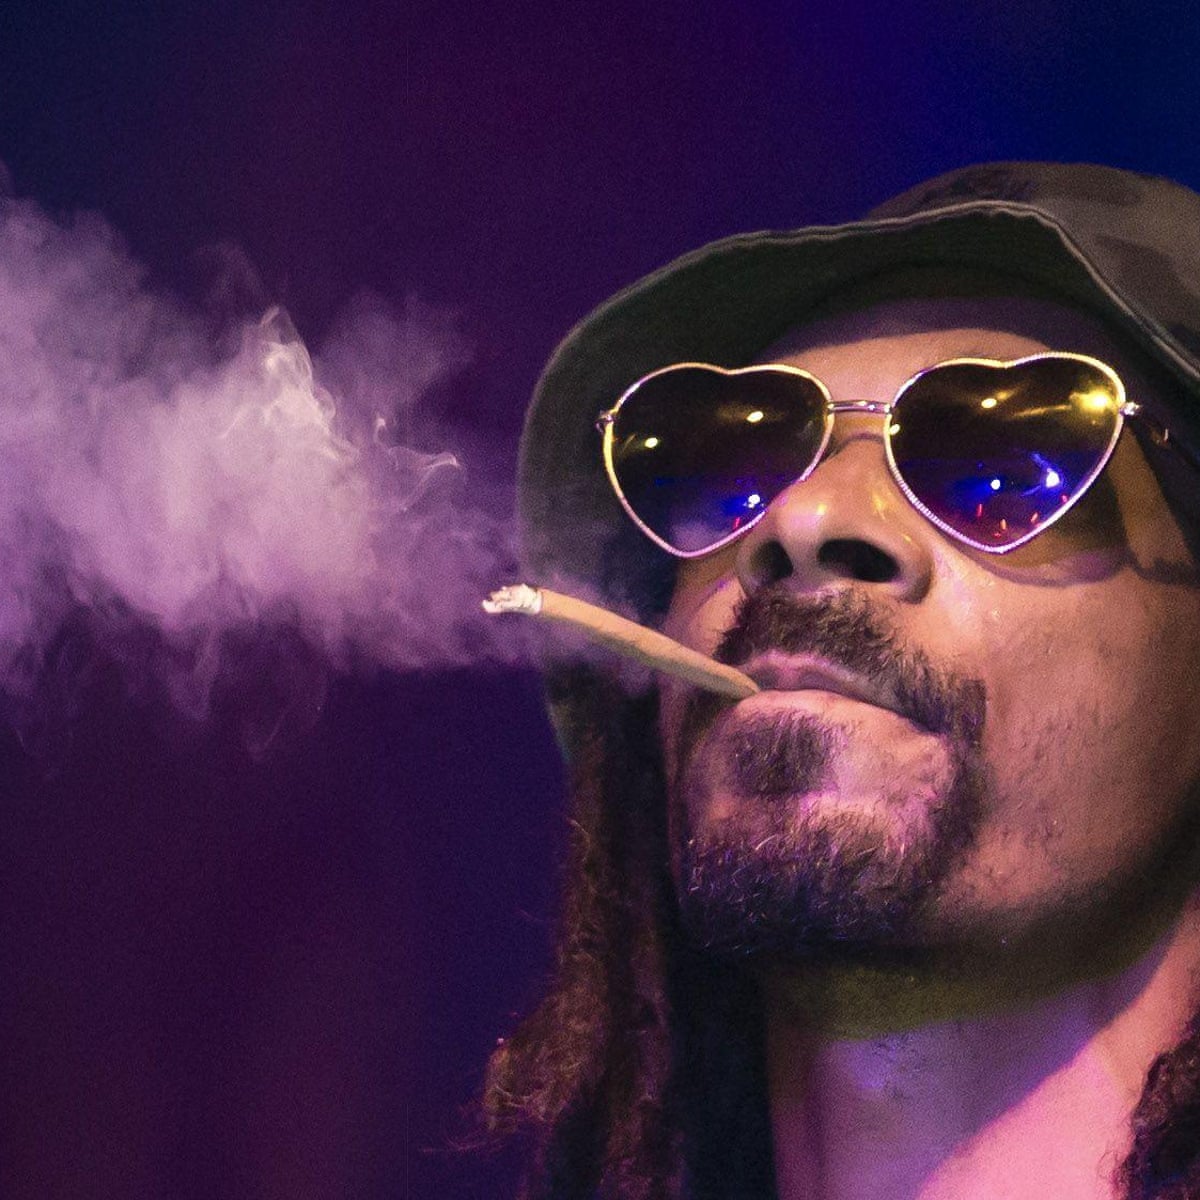 Snoop Dogg attacked by Donald Trump over Lavender video | Snoop Dogg | The  Guardian